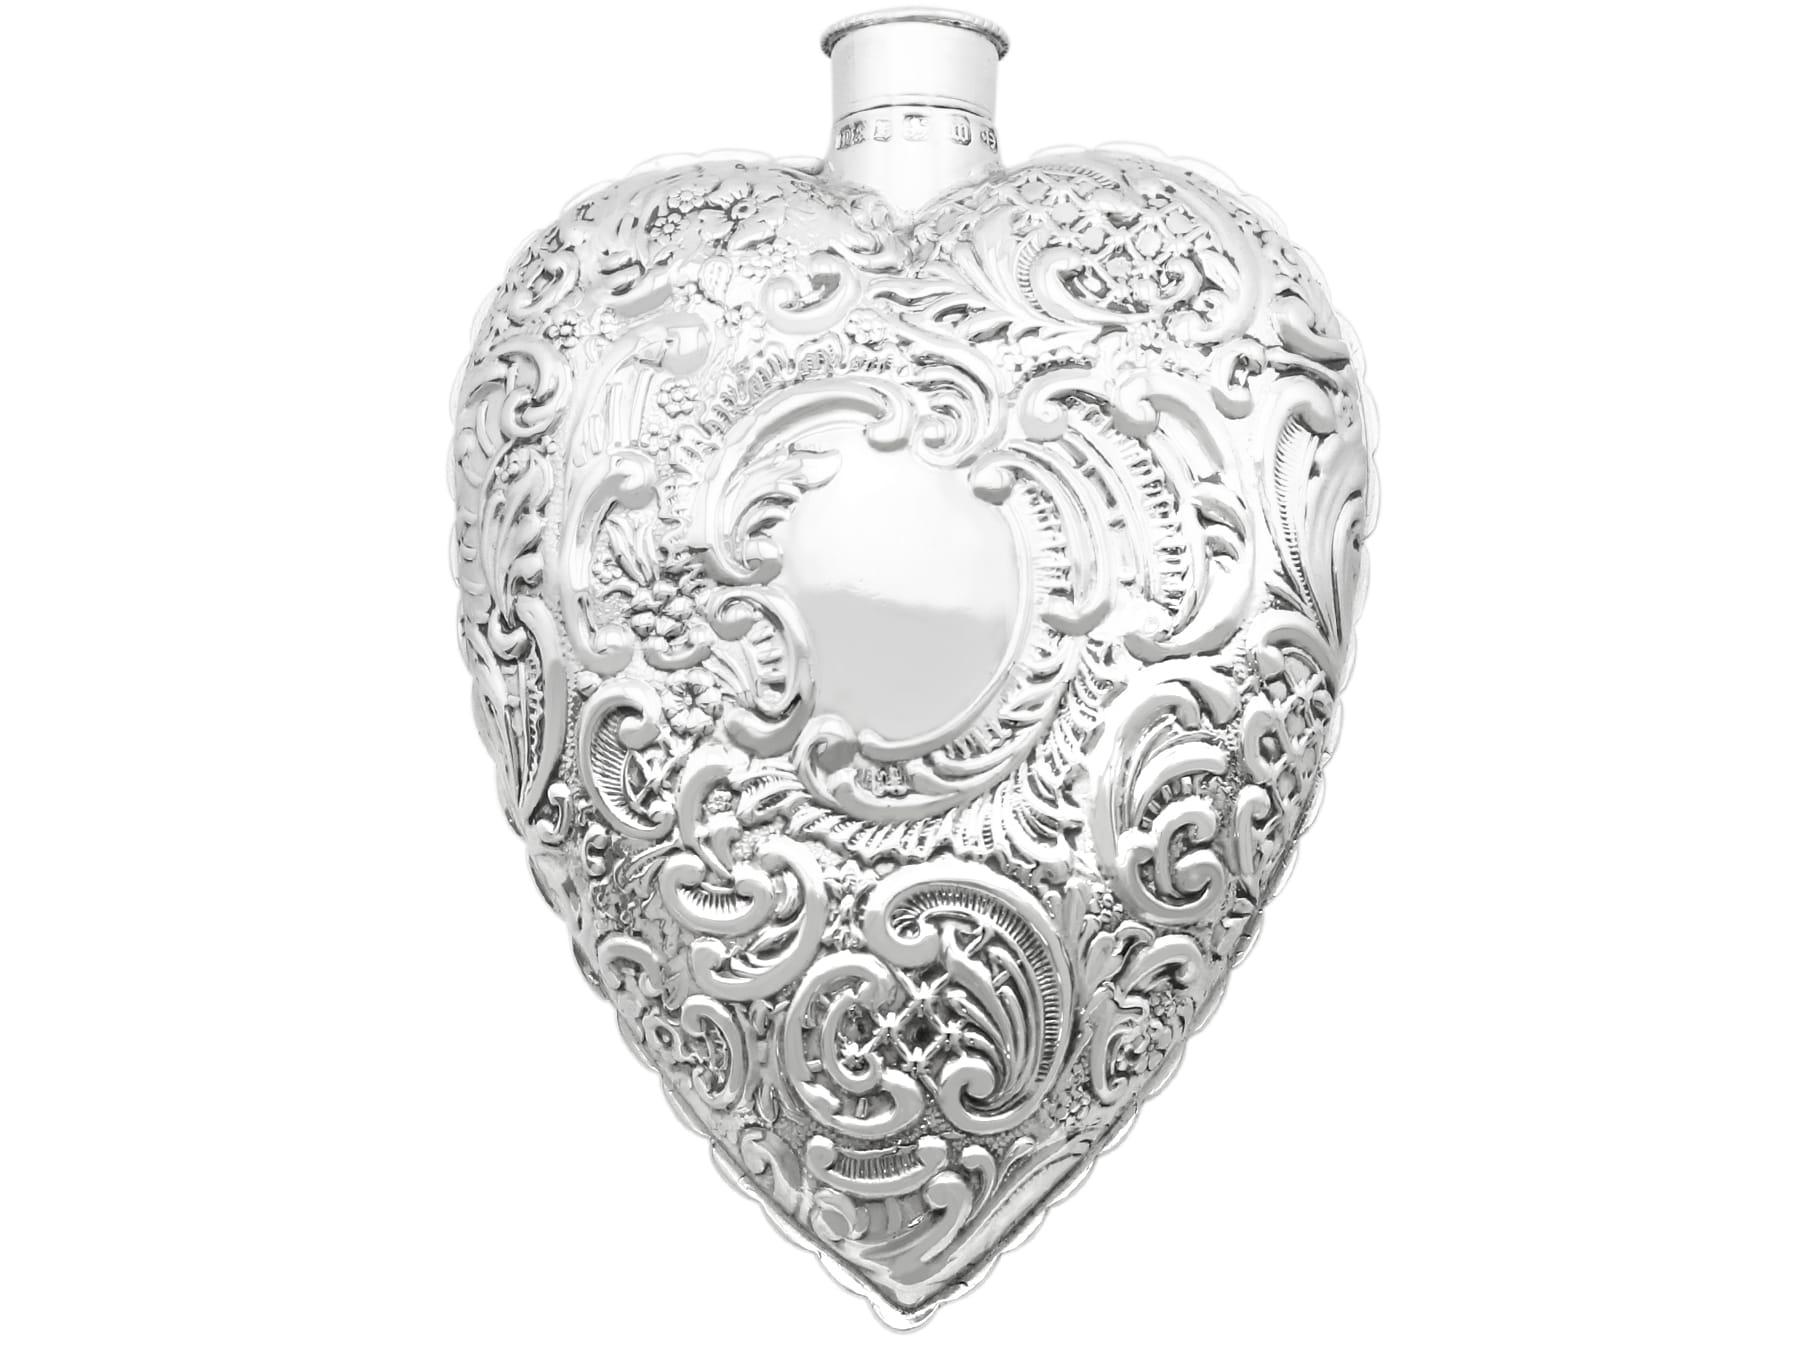 An exceptional, fine and impressive antique Victorian English sterling silver heart-shaped scent flask; an addition to our diverse silverware collection.

This fine antique Victorian sterling silver scent flask has a heart-shaped form.

Each surface